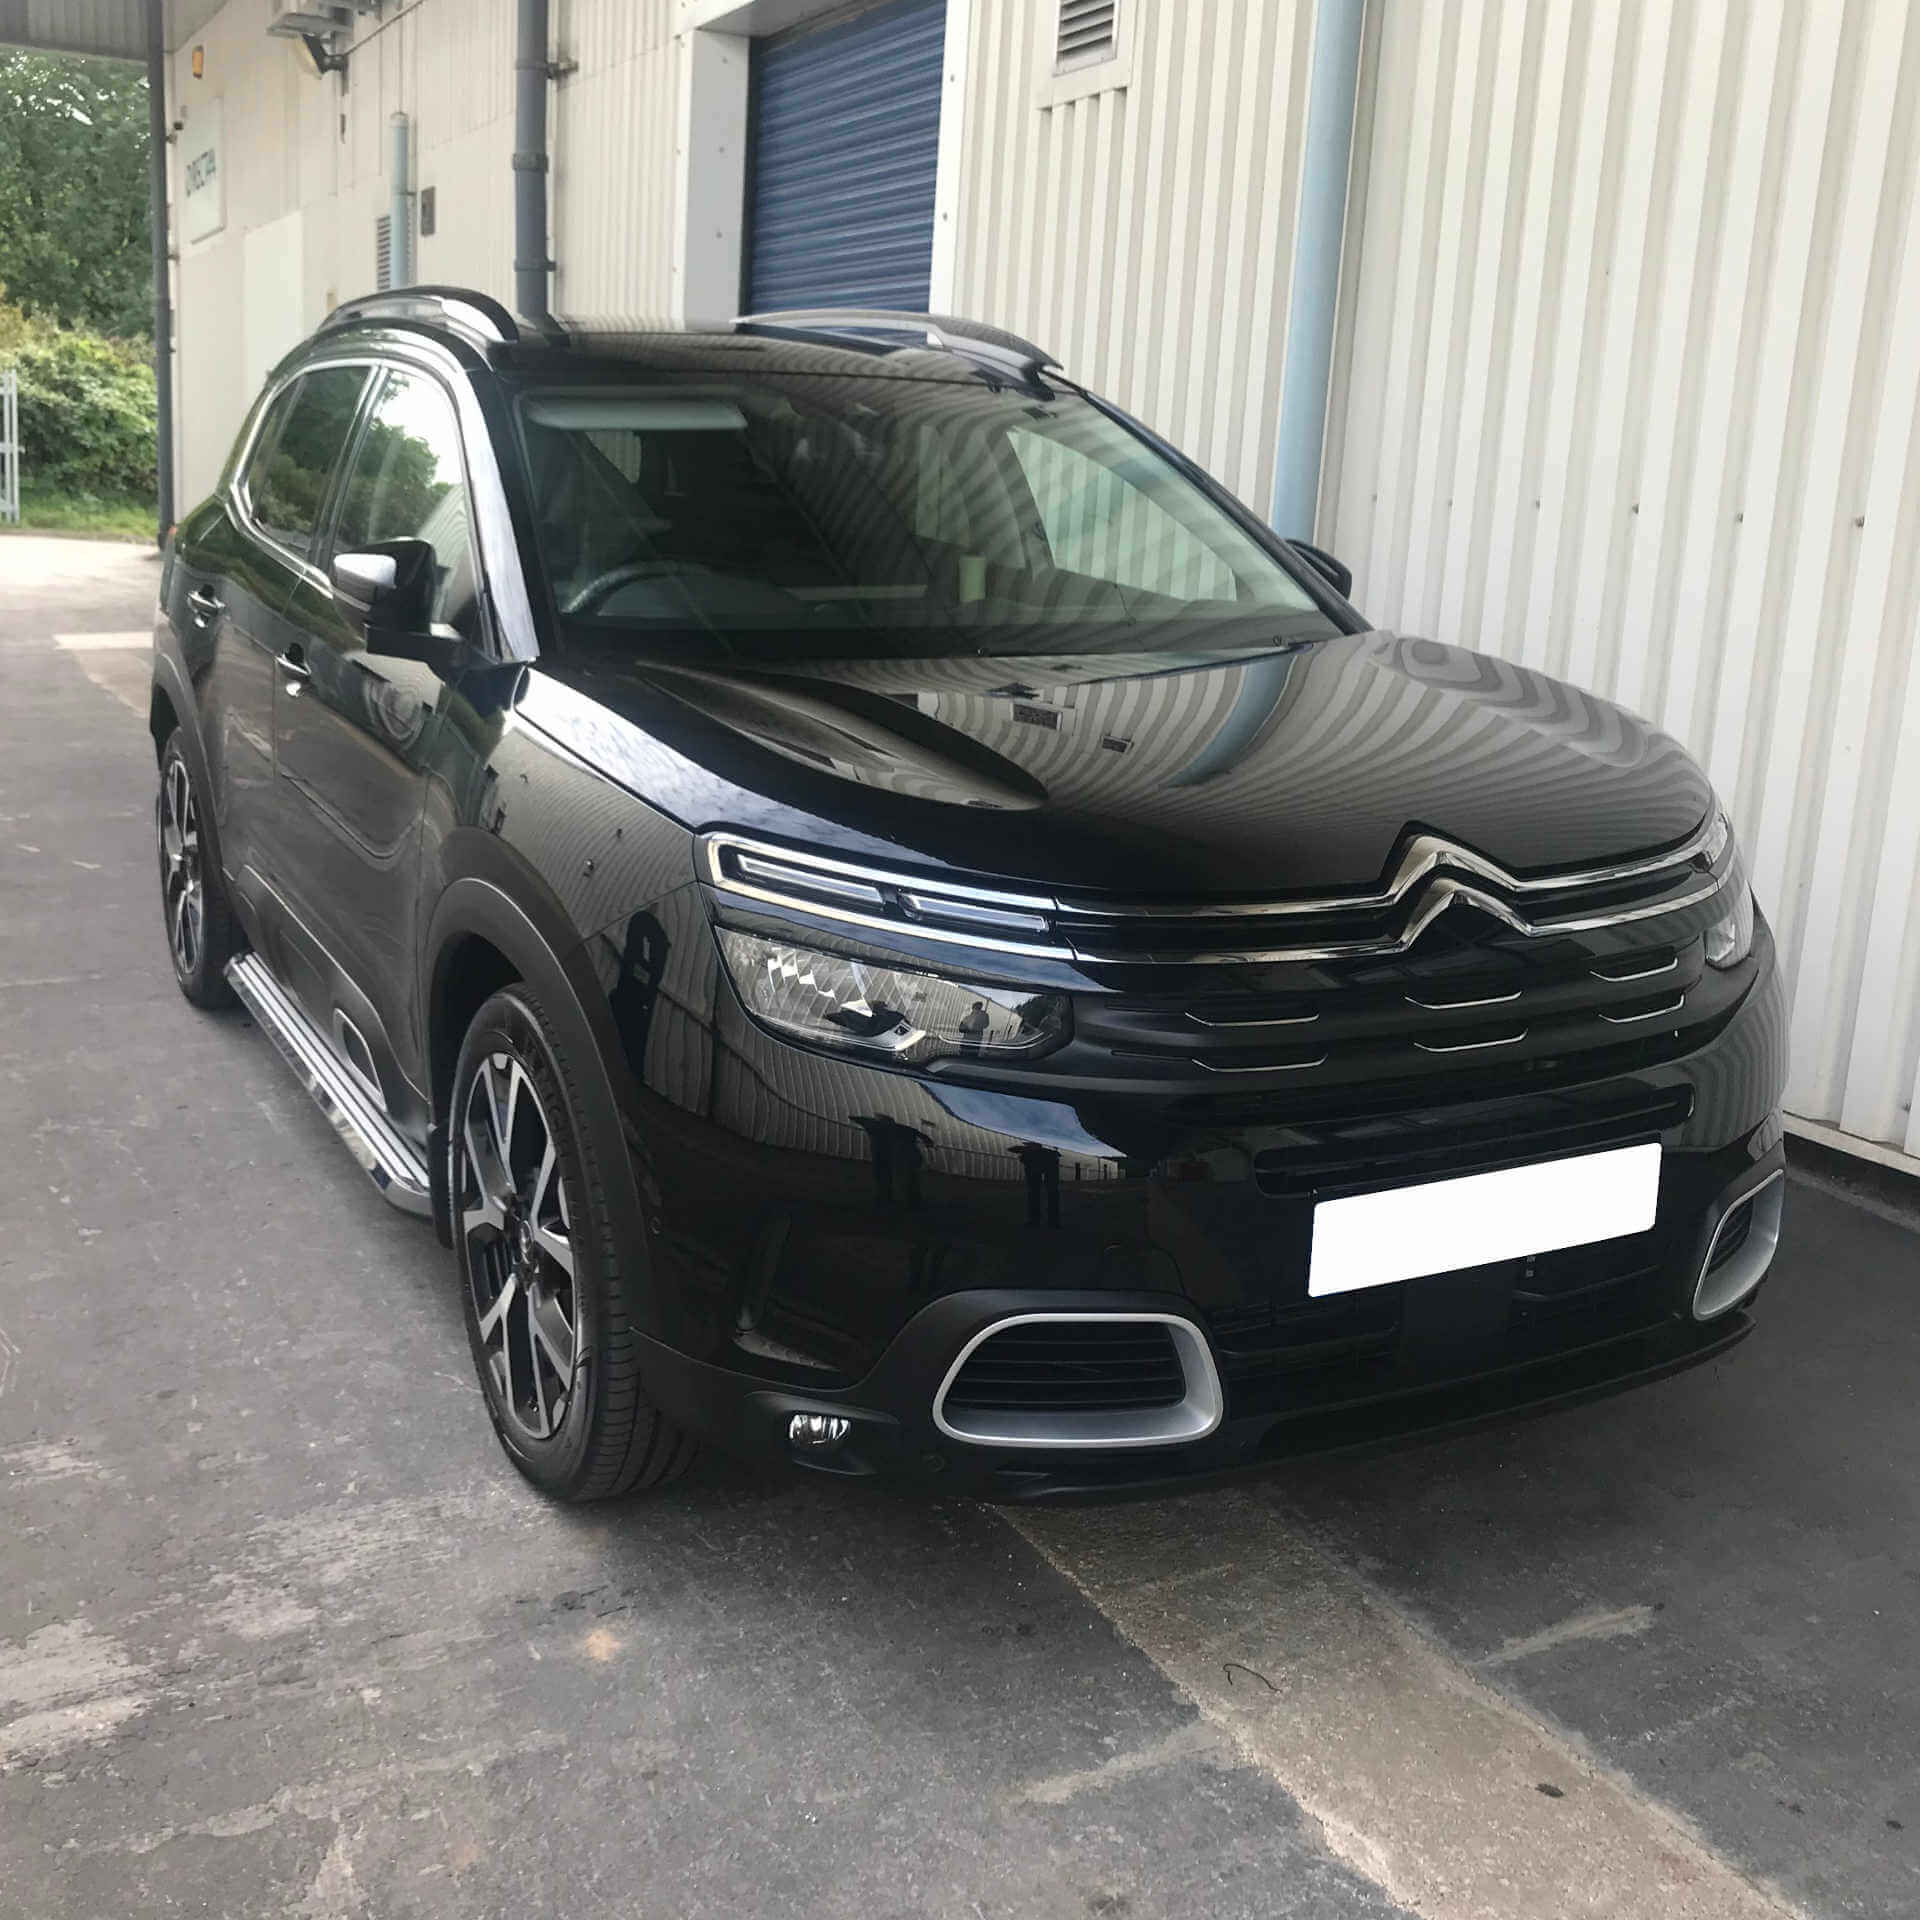 Direct4x4 Accessories for Citroen C5 Aircross Vehicles